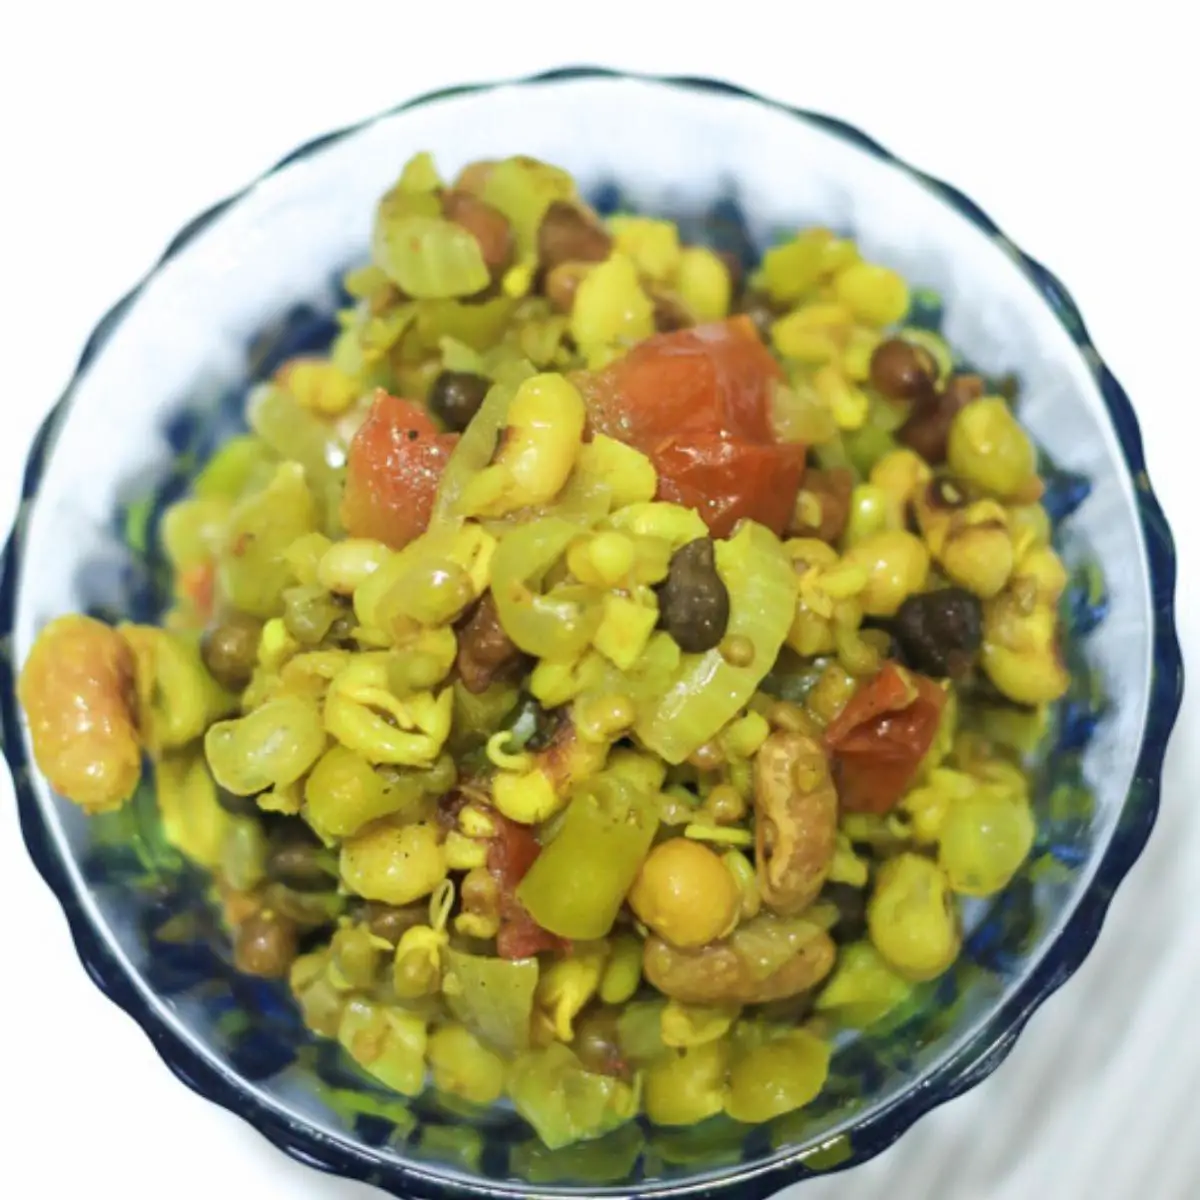 A bowl with usal sprouts.